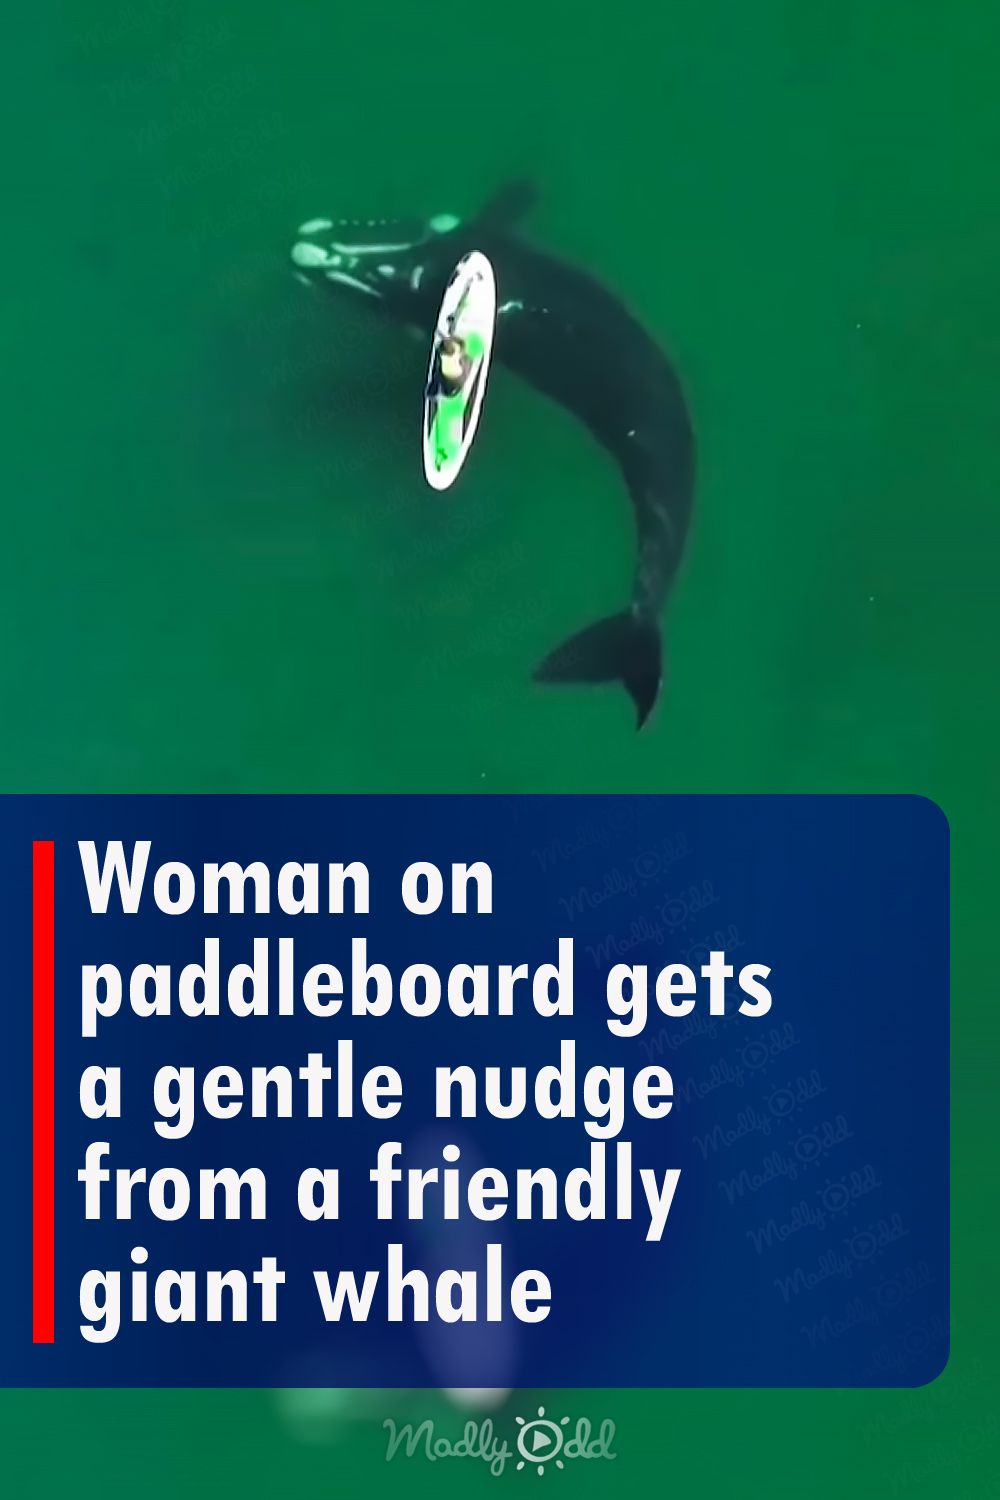 Woman on paddleboard gets a gentle nudge from a friendly giant whale